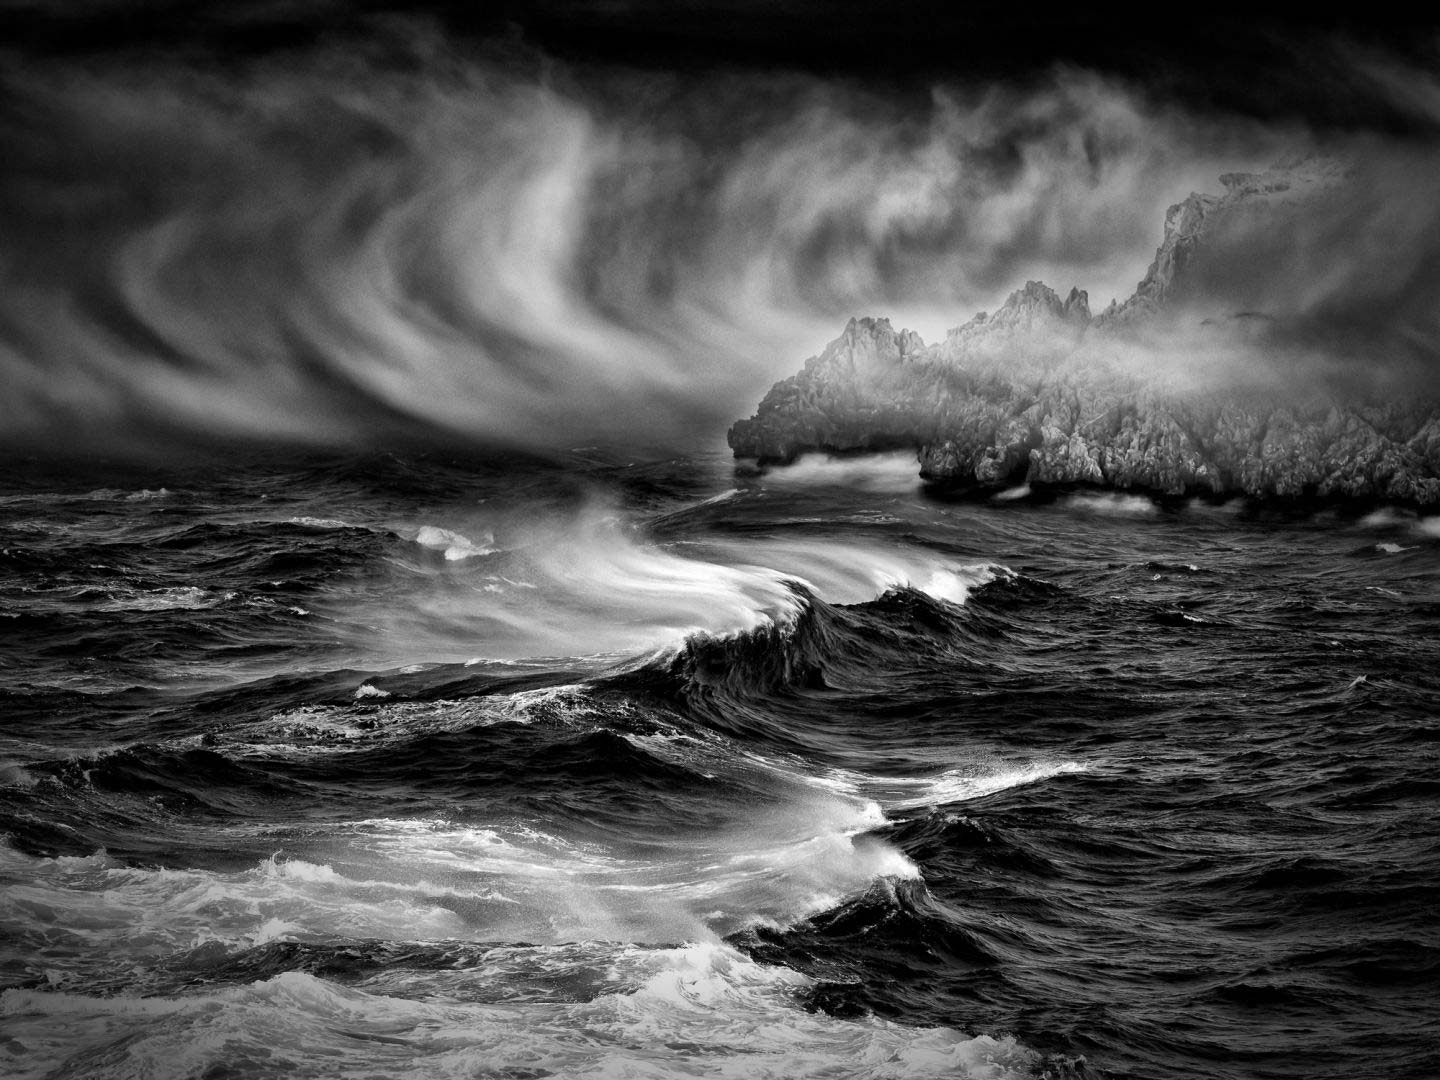 The winds of Aegean Sea, © almoustris, 1st Prize Art, Olympus Global Open Photo Contest